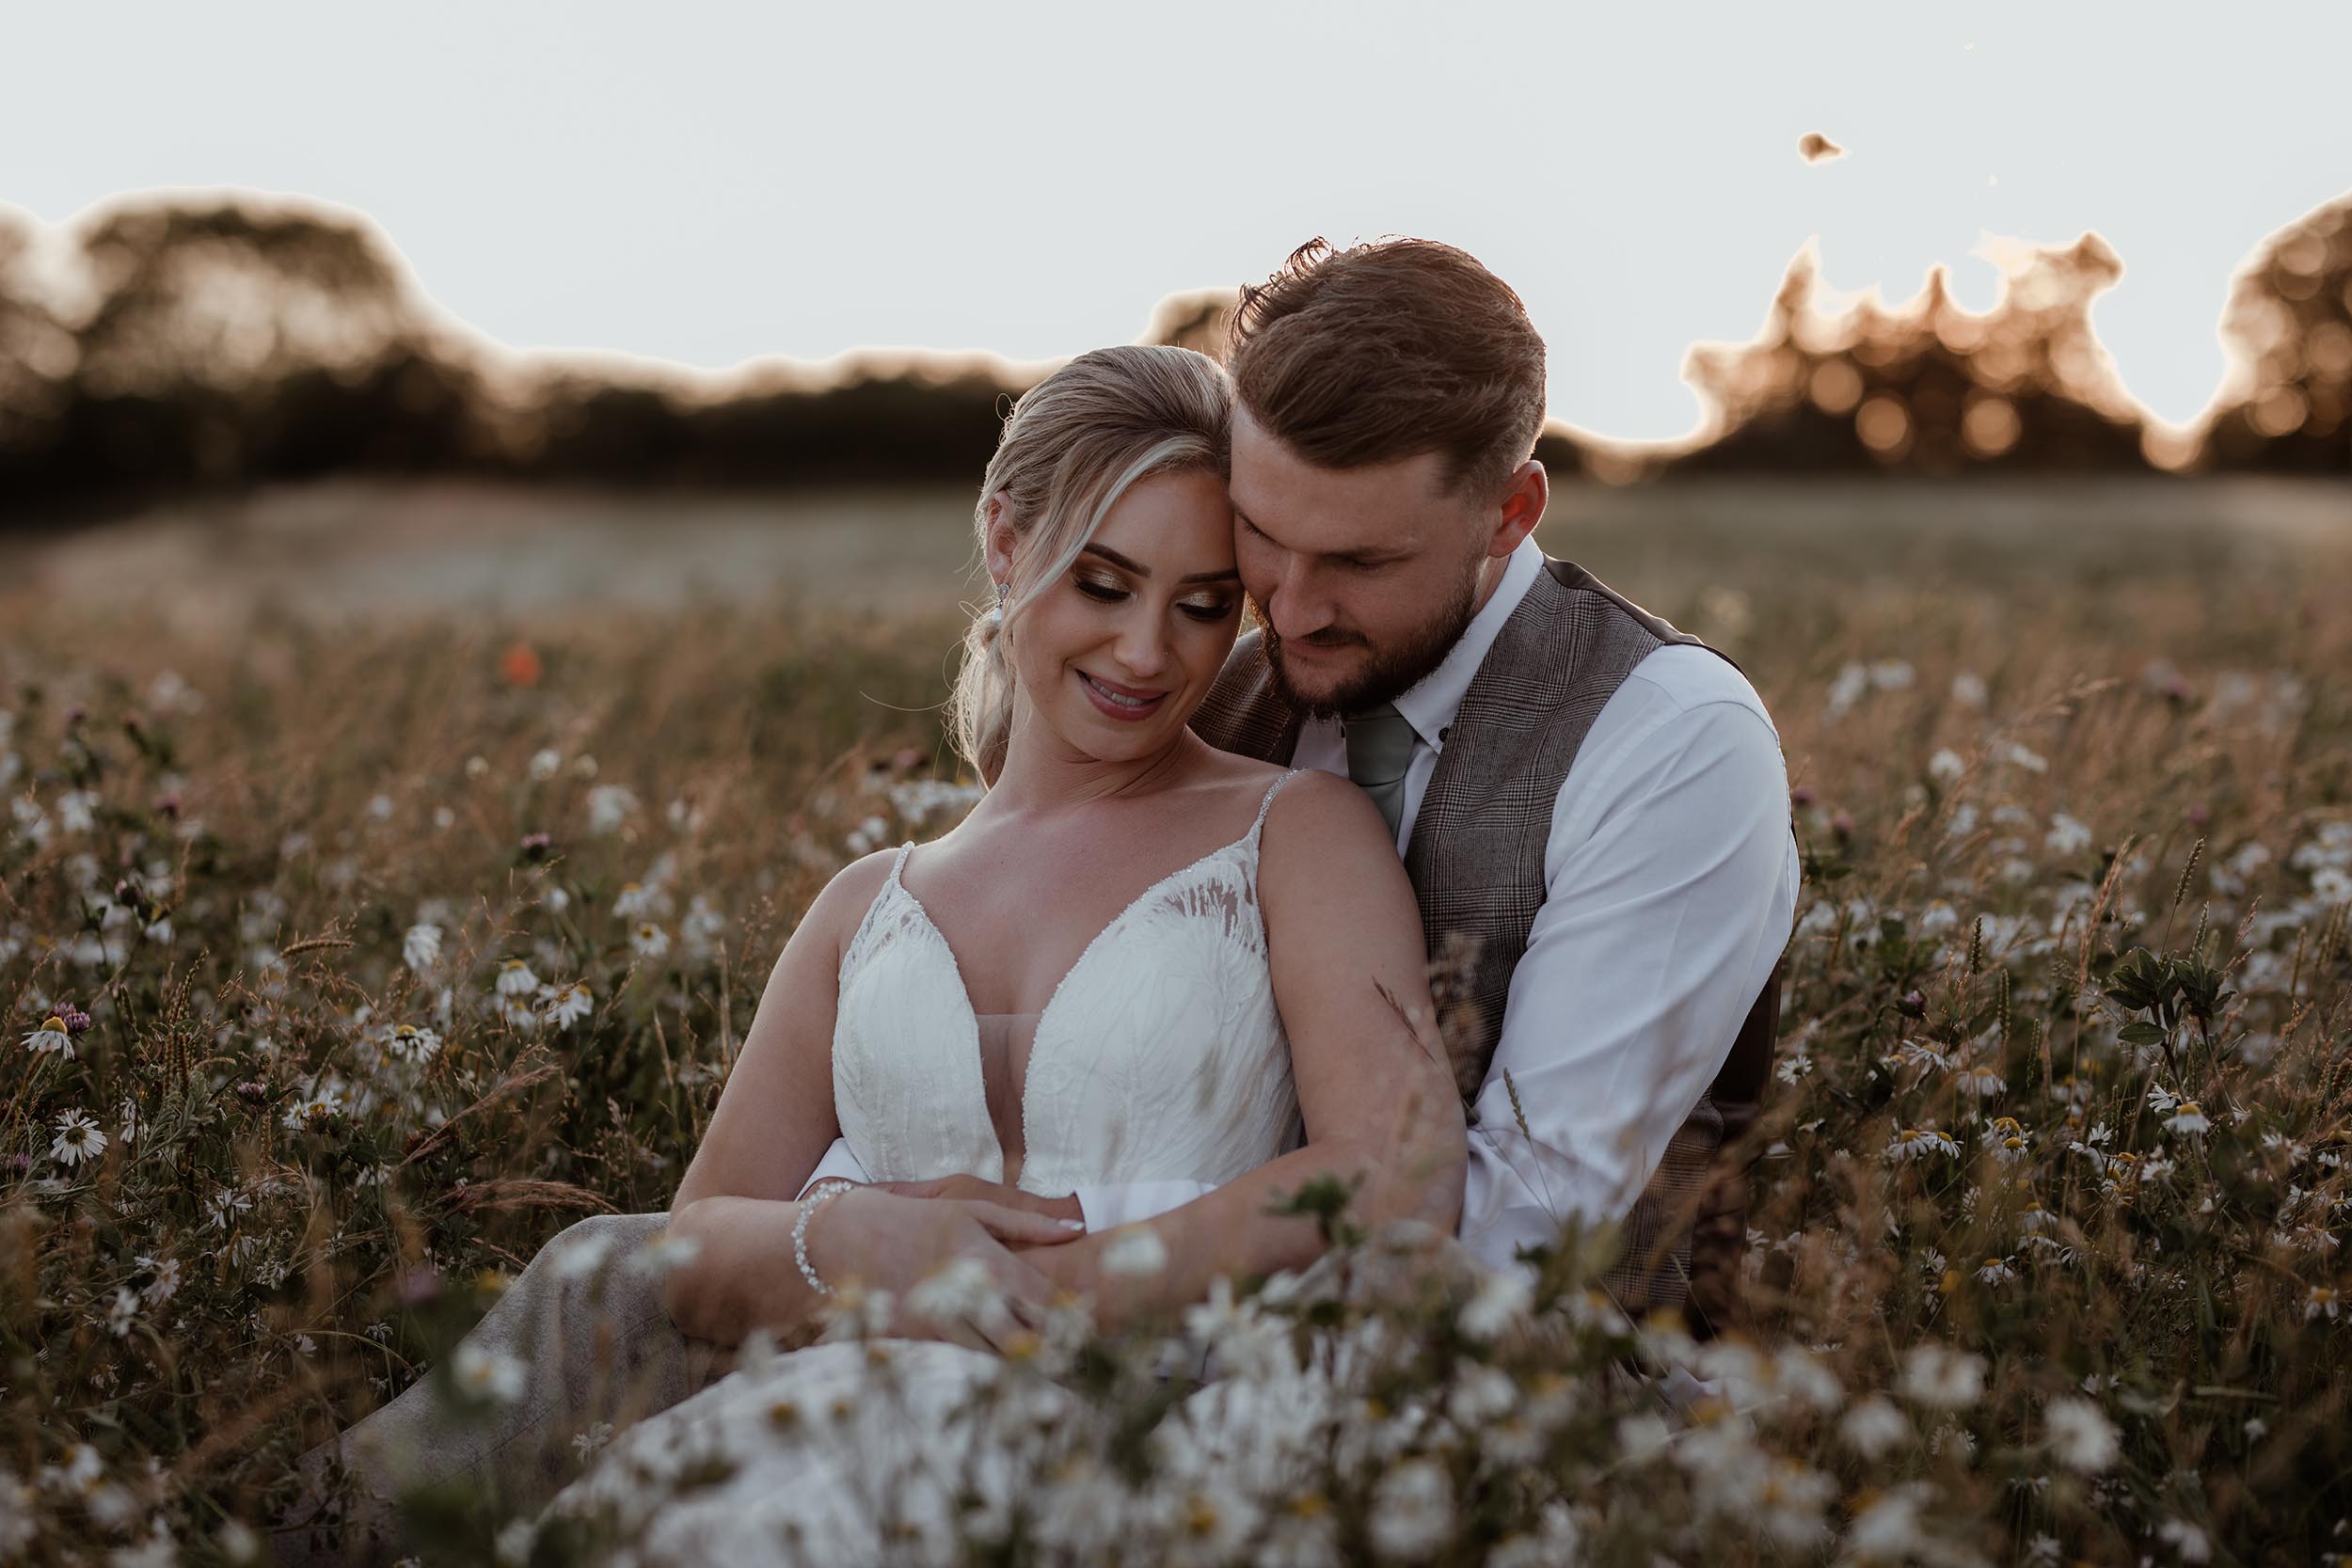 bride and groom hug in daisy field at golden hour at Crockwell Farm wedding